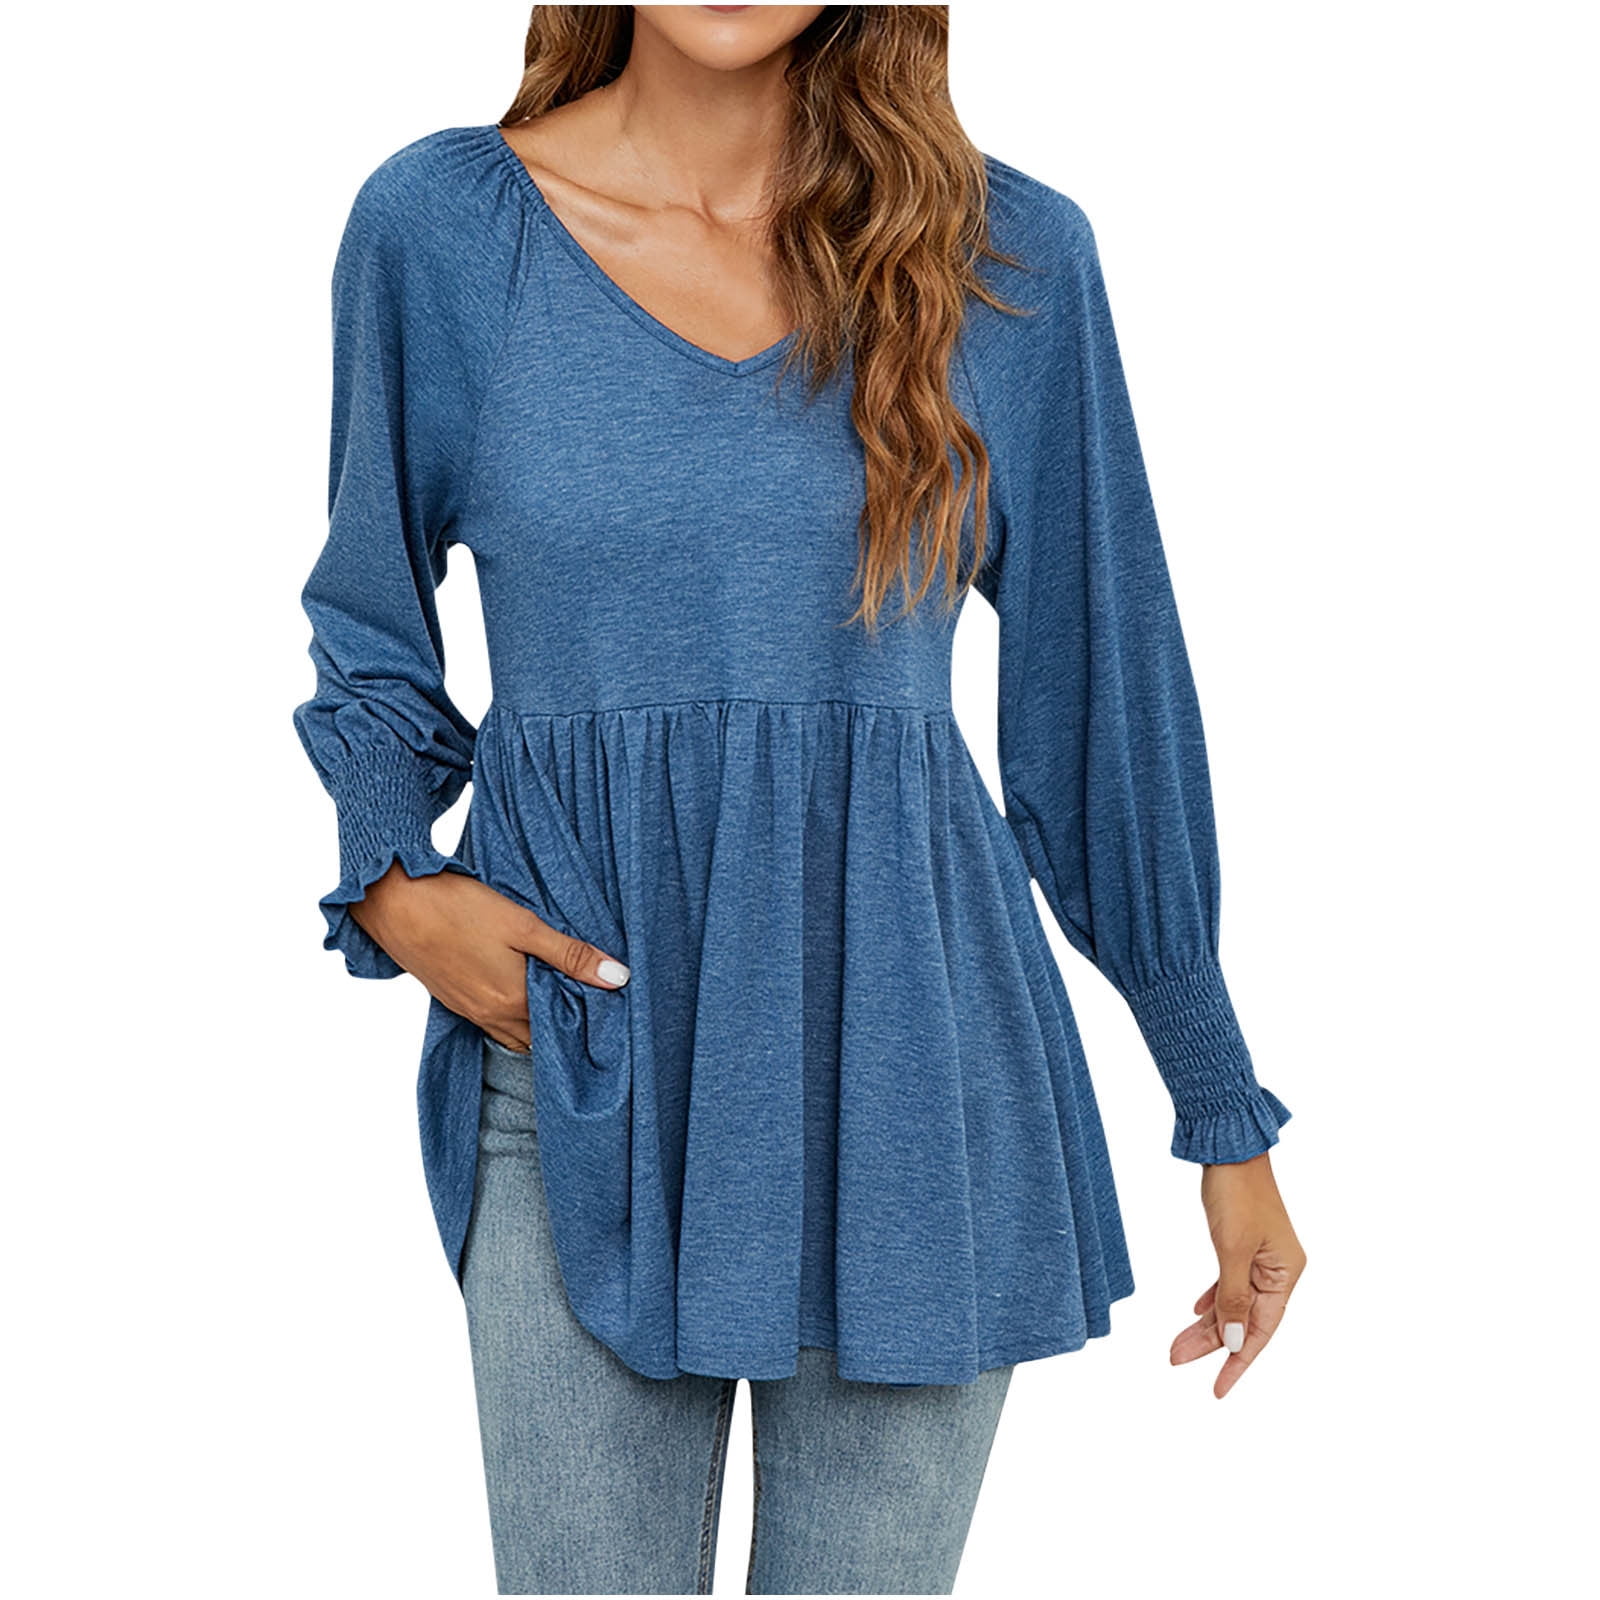 Scyoekwg Womens Long Sleeve Shirts Fall Going Out Tops Square-Neck